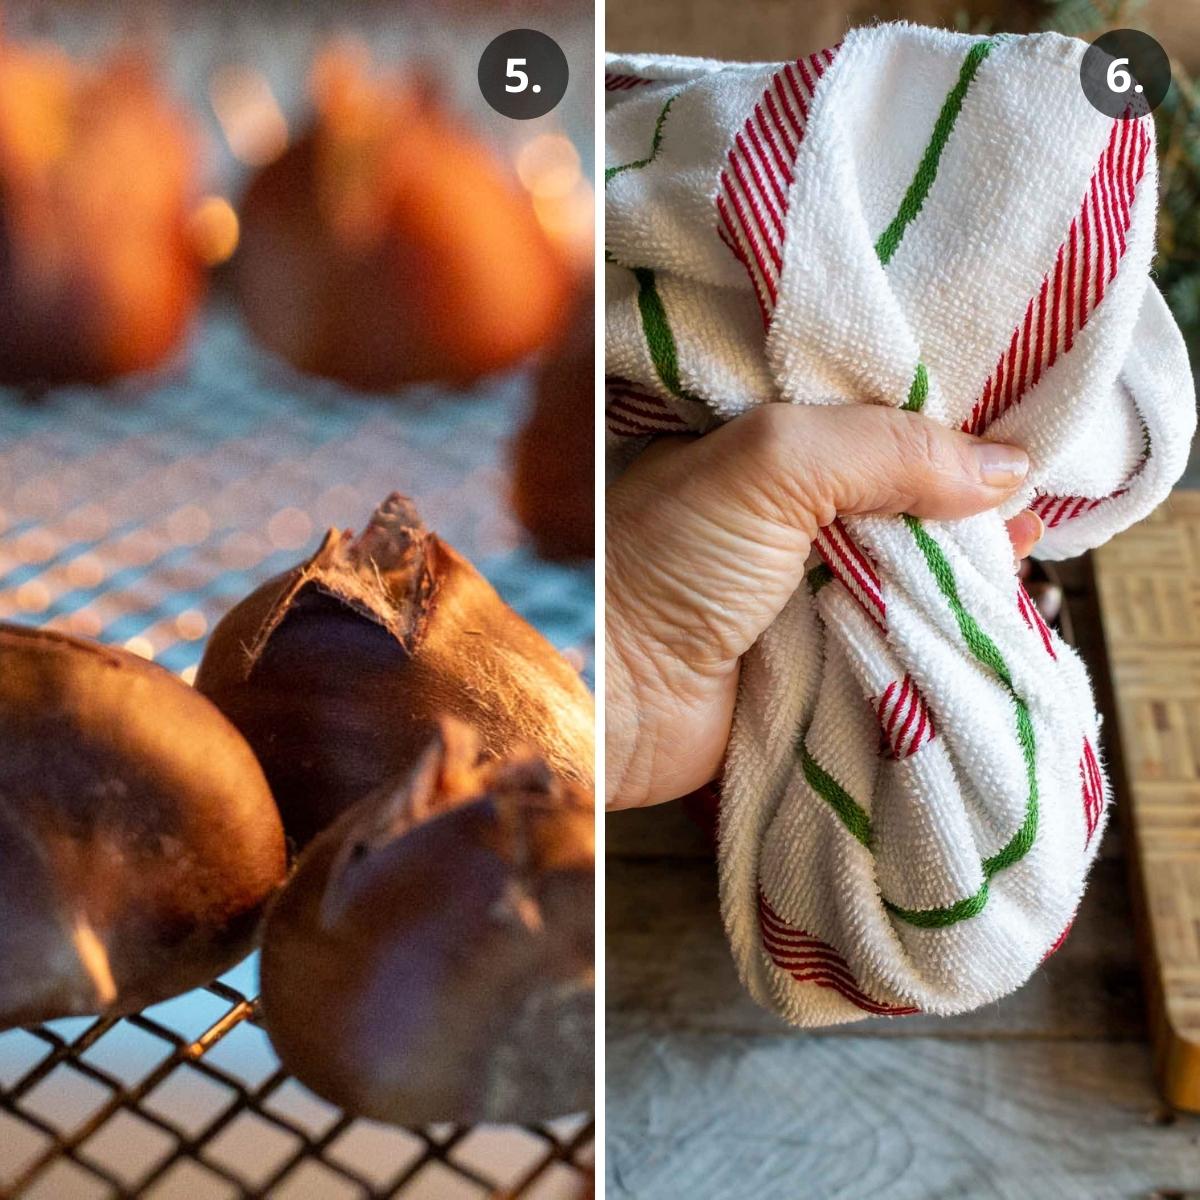 chestnuts roasting in air fryer and getting wrapped up in a tea towel.